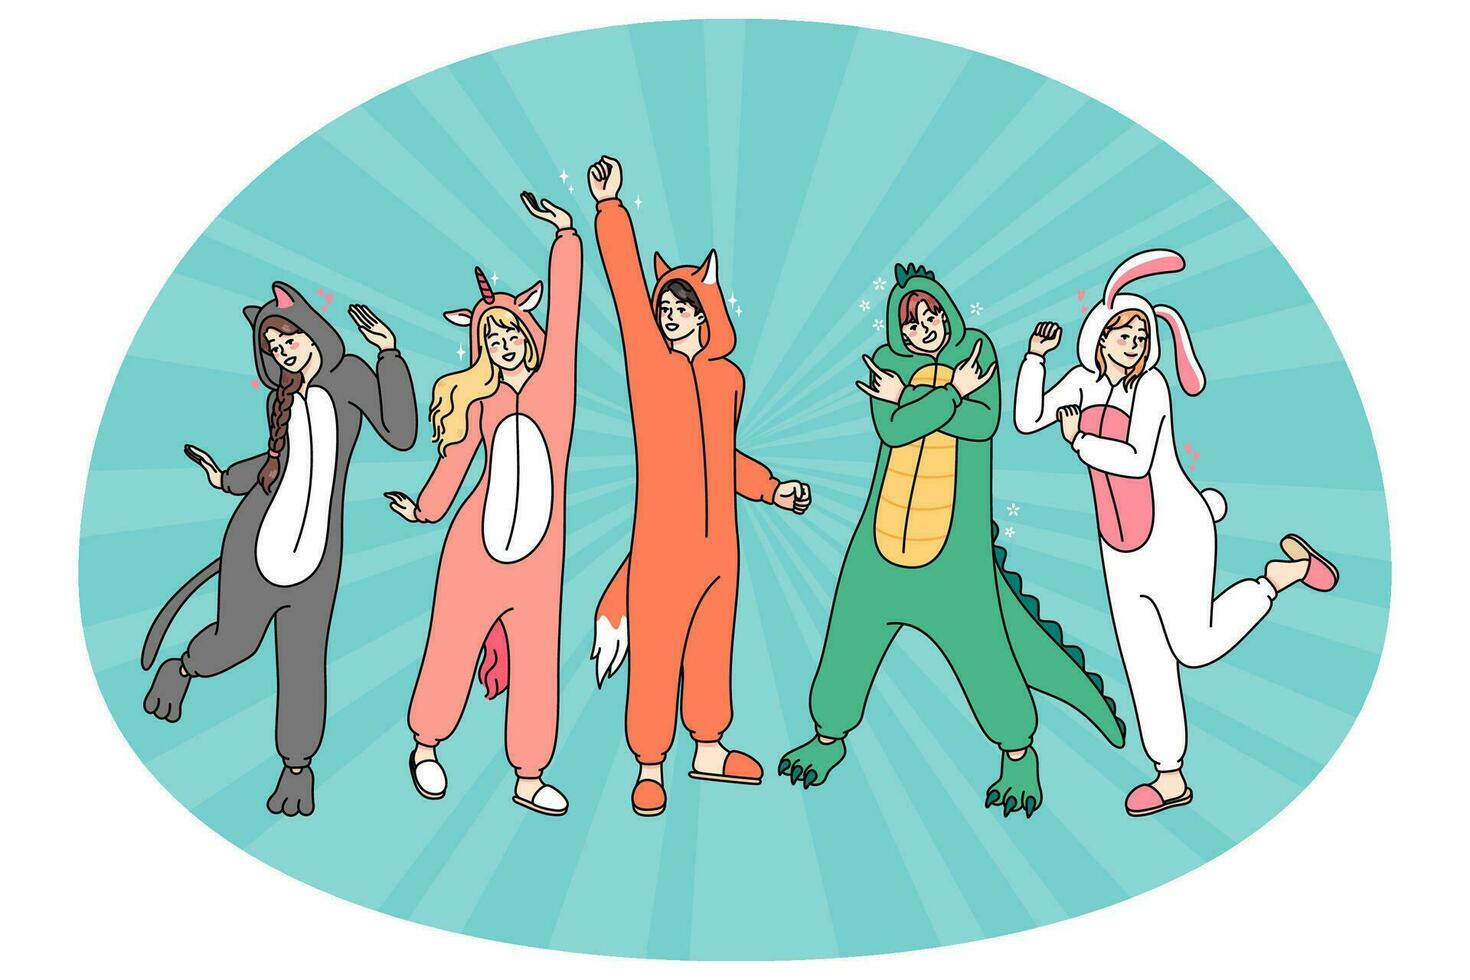 Happy people in funny animal costumes dancing and having fun. Friendship and partying. Flat vector illustration.